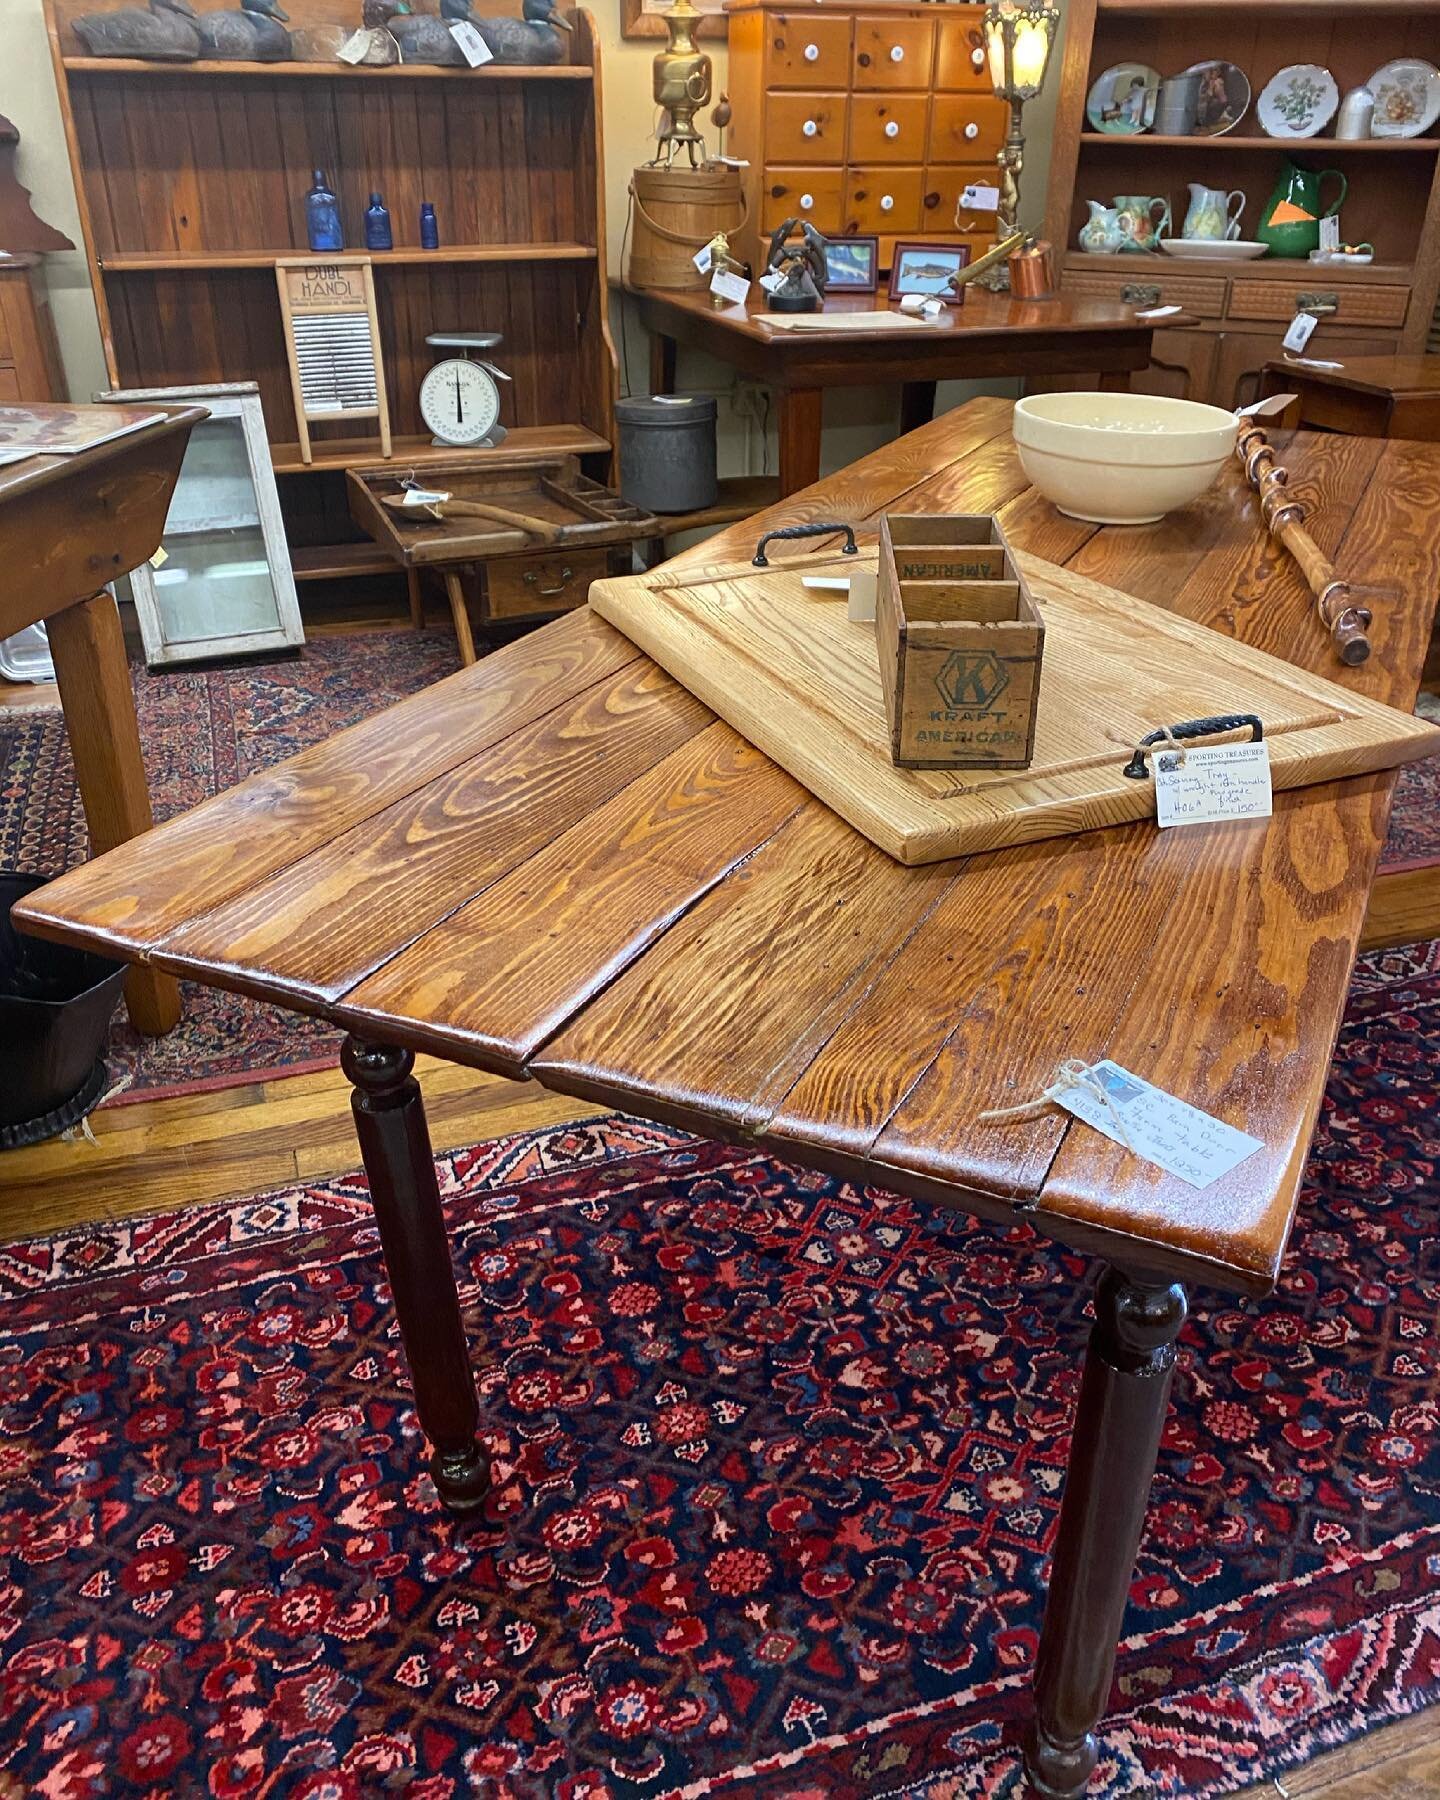 Sporting Treasures at The Antique Market in Clinton Tennessee.... Featuring reimagined barn wood farm tables for your cabin or lake house.... #knoxvilleantiques #clintontn #farmhousestyle